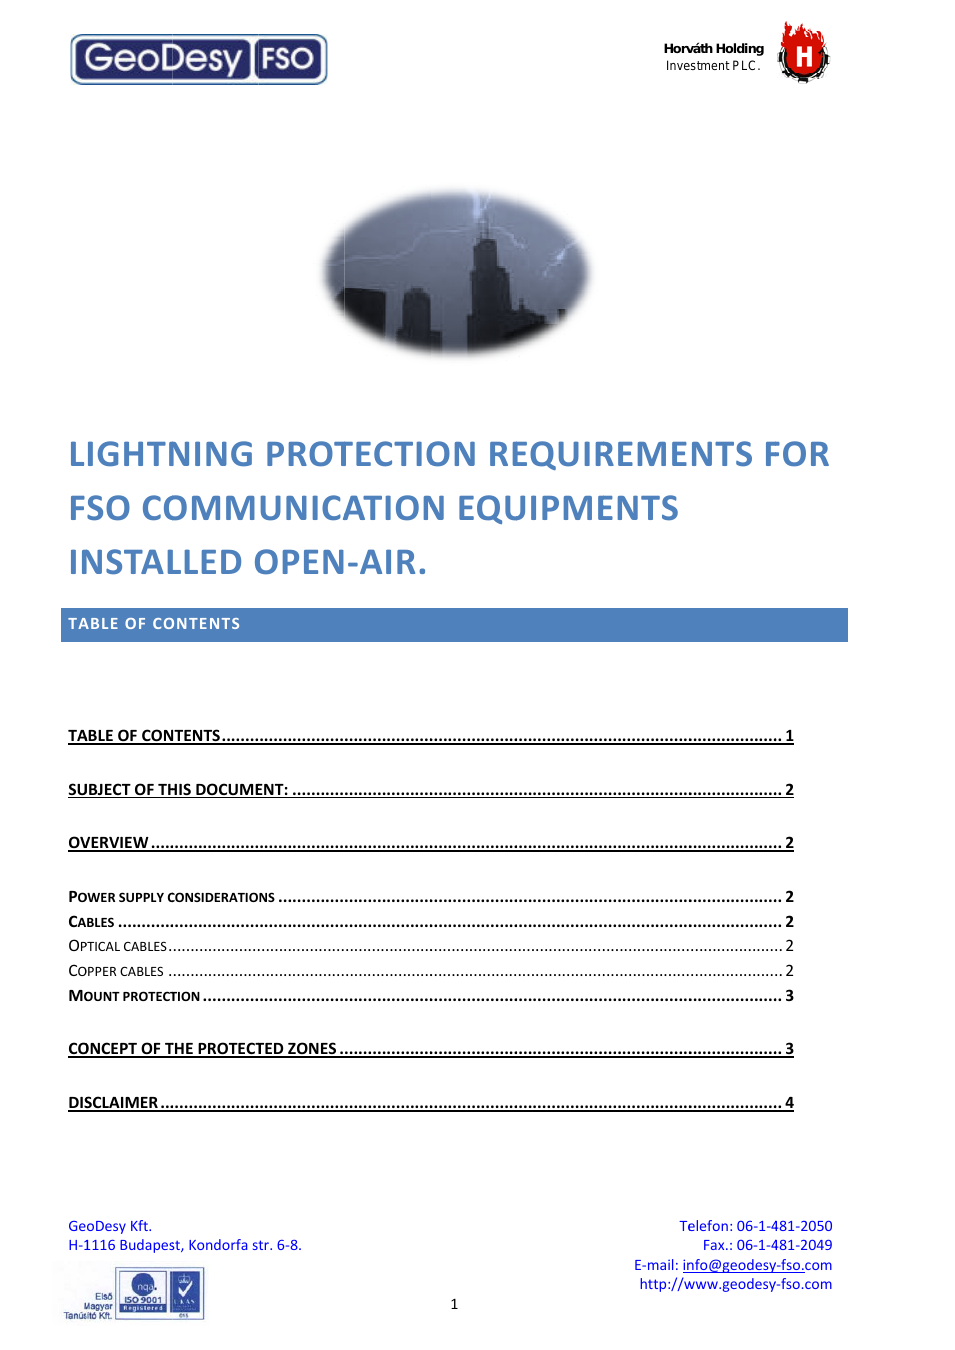 FSO lightning protection requirements for FSO